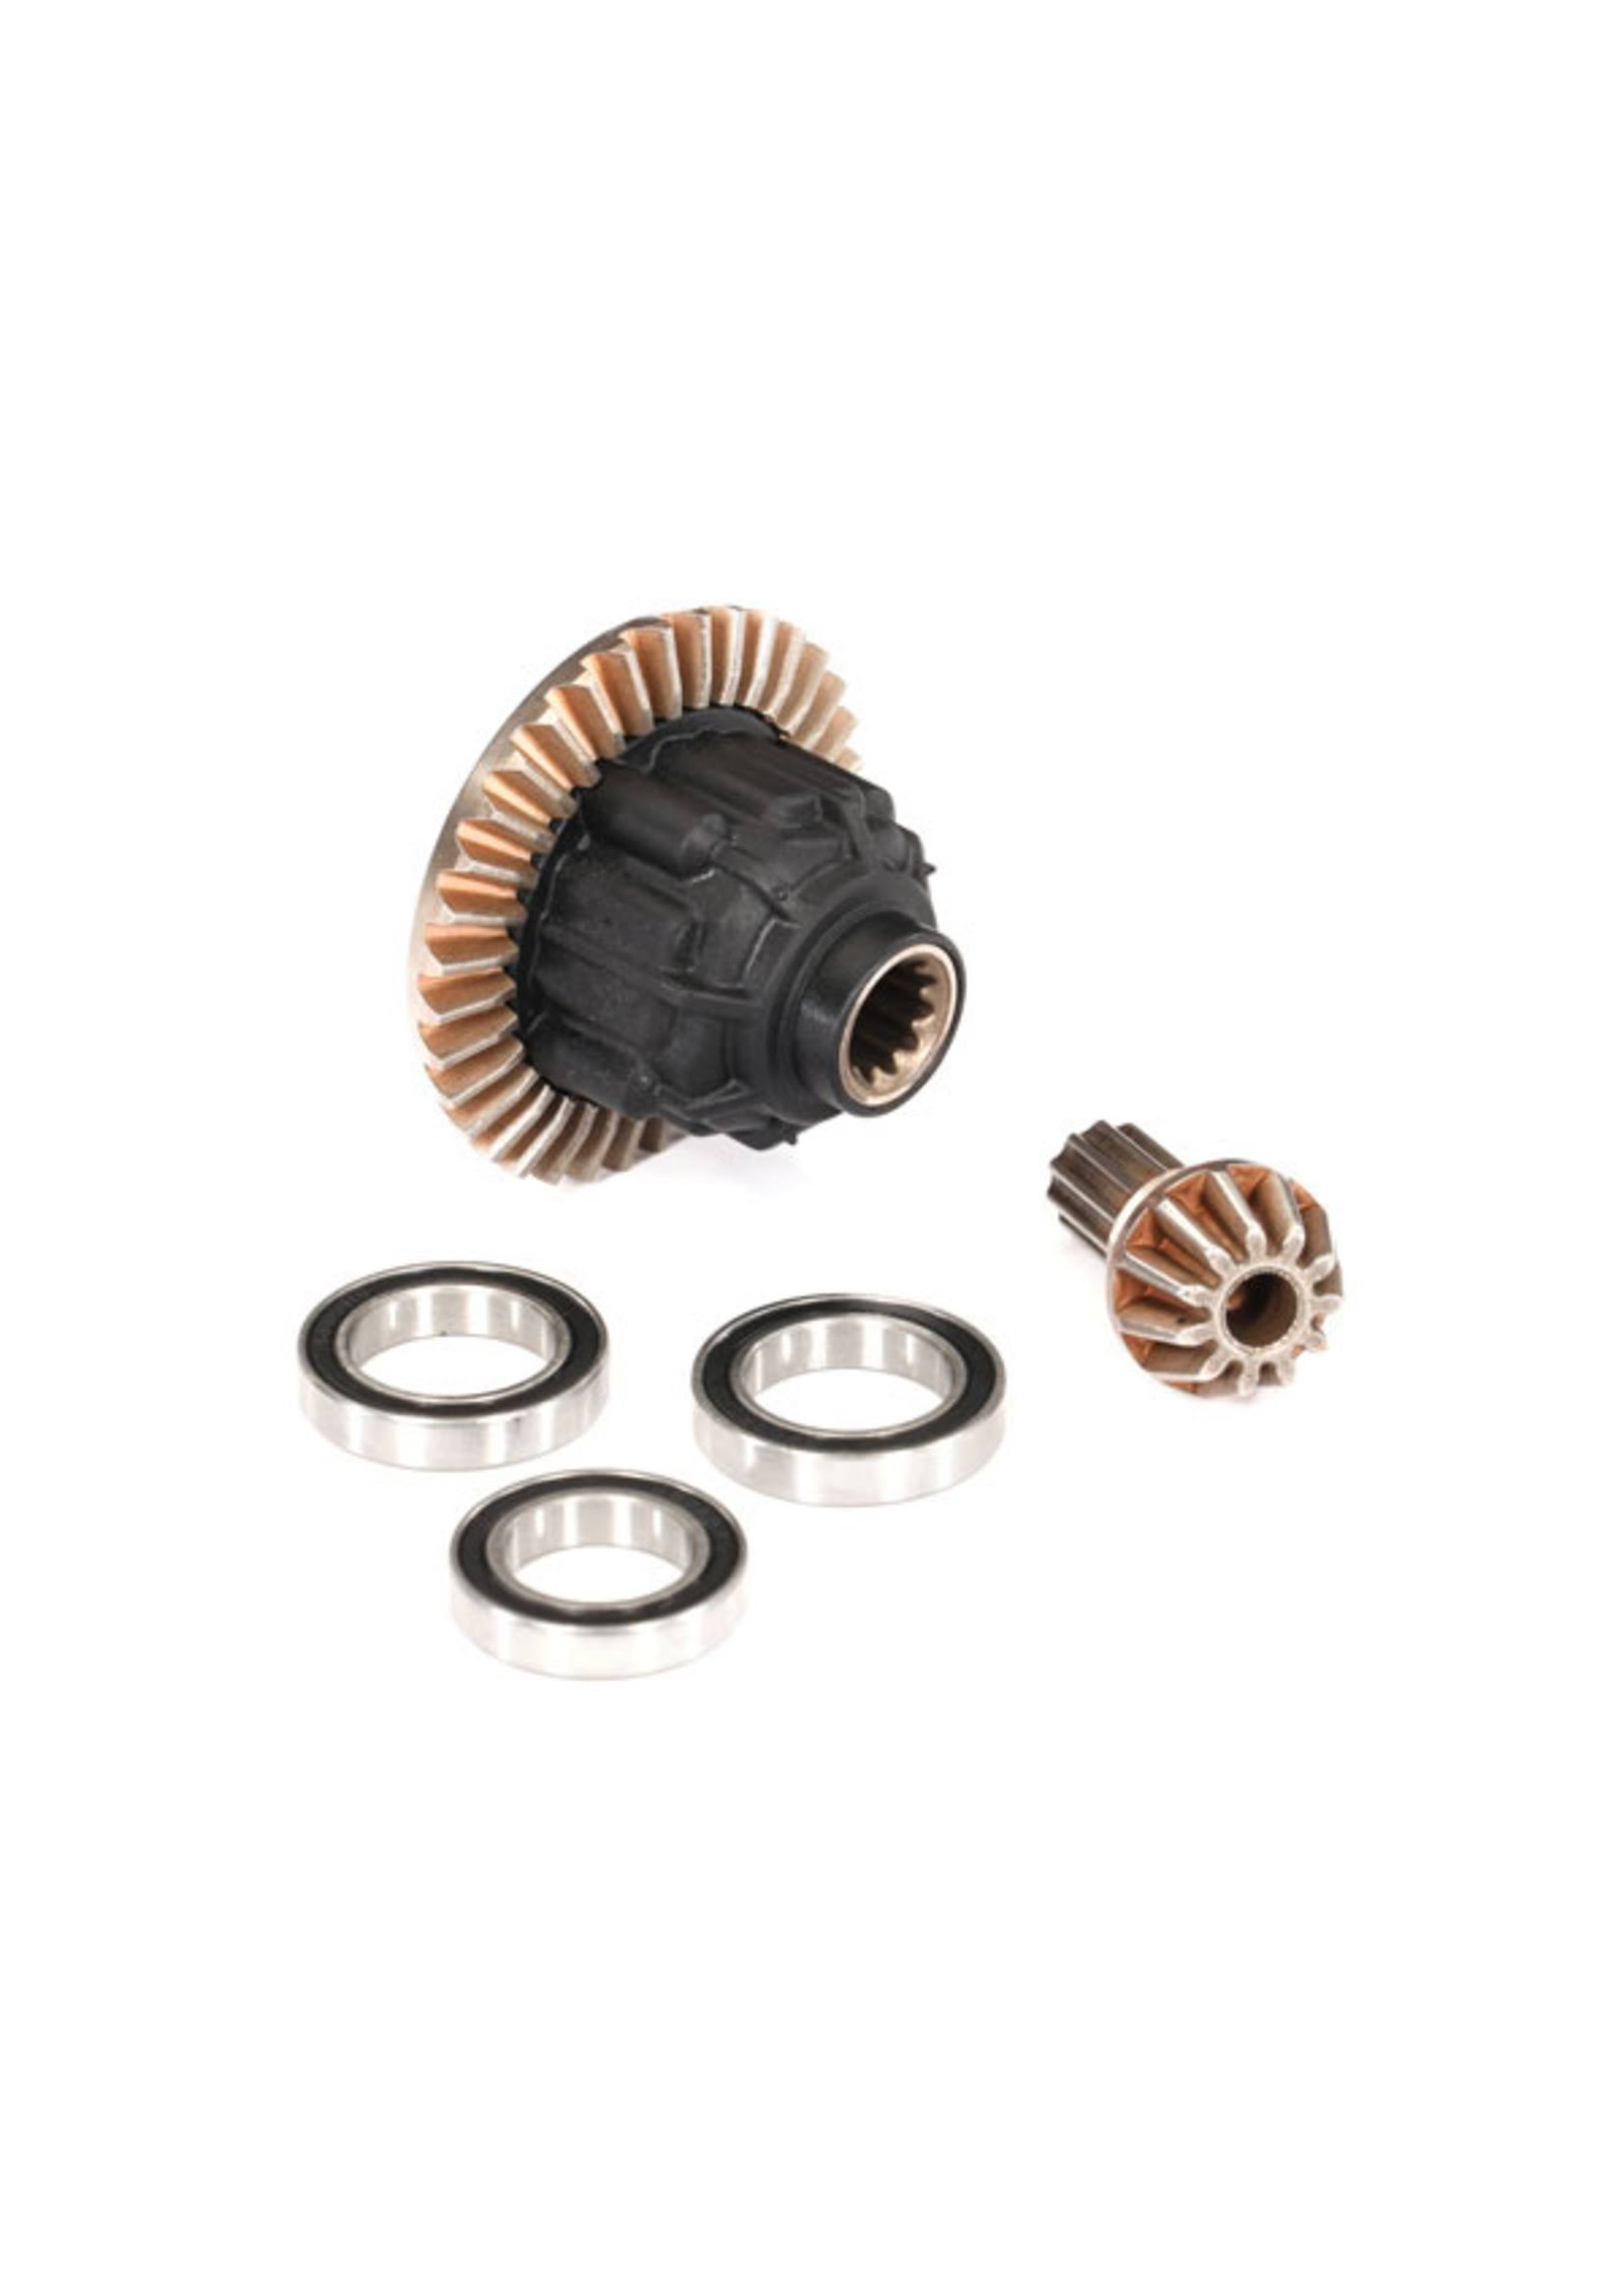 Traxxas 7881 - Differential Rear Complete Fits X-Maxx 8S